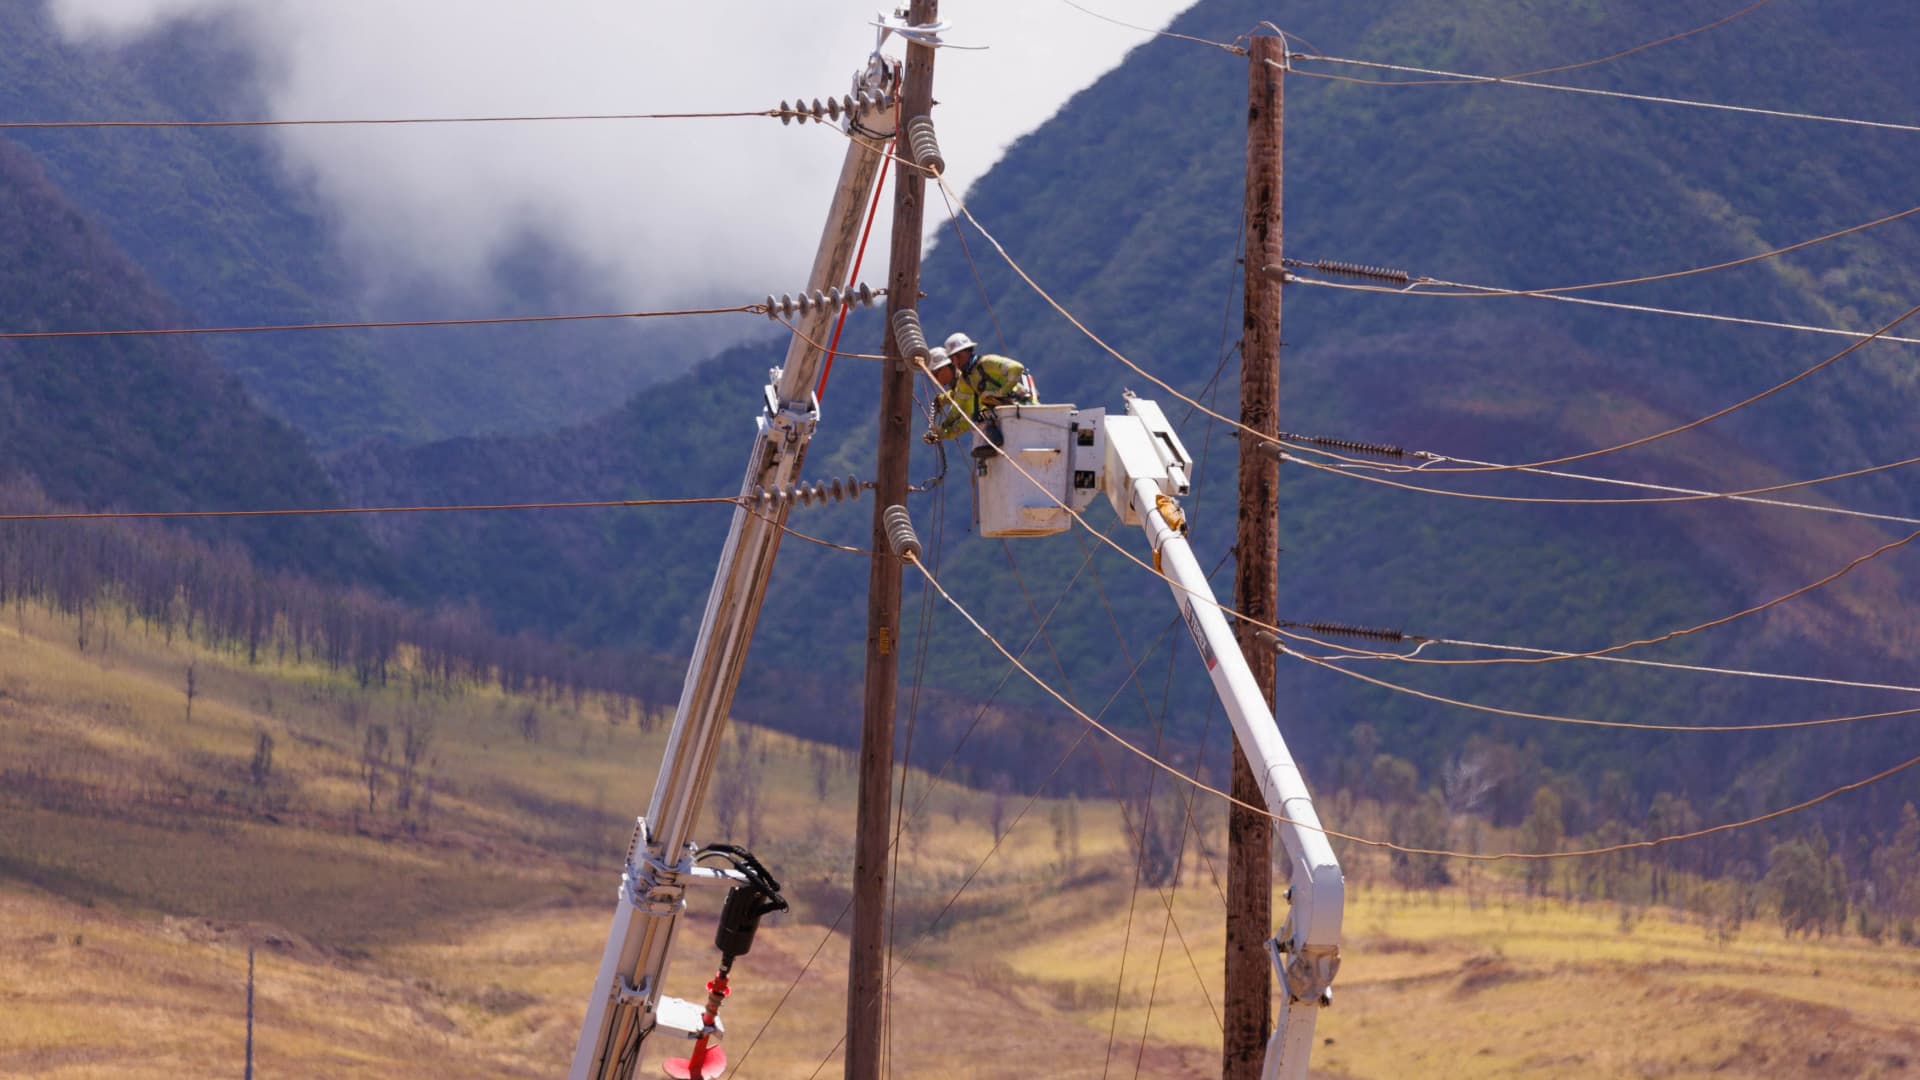 Electric utilities face billions in wildfire liability with aging power lines risking another catastrophe